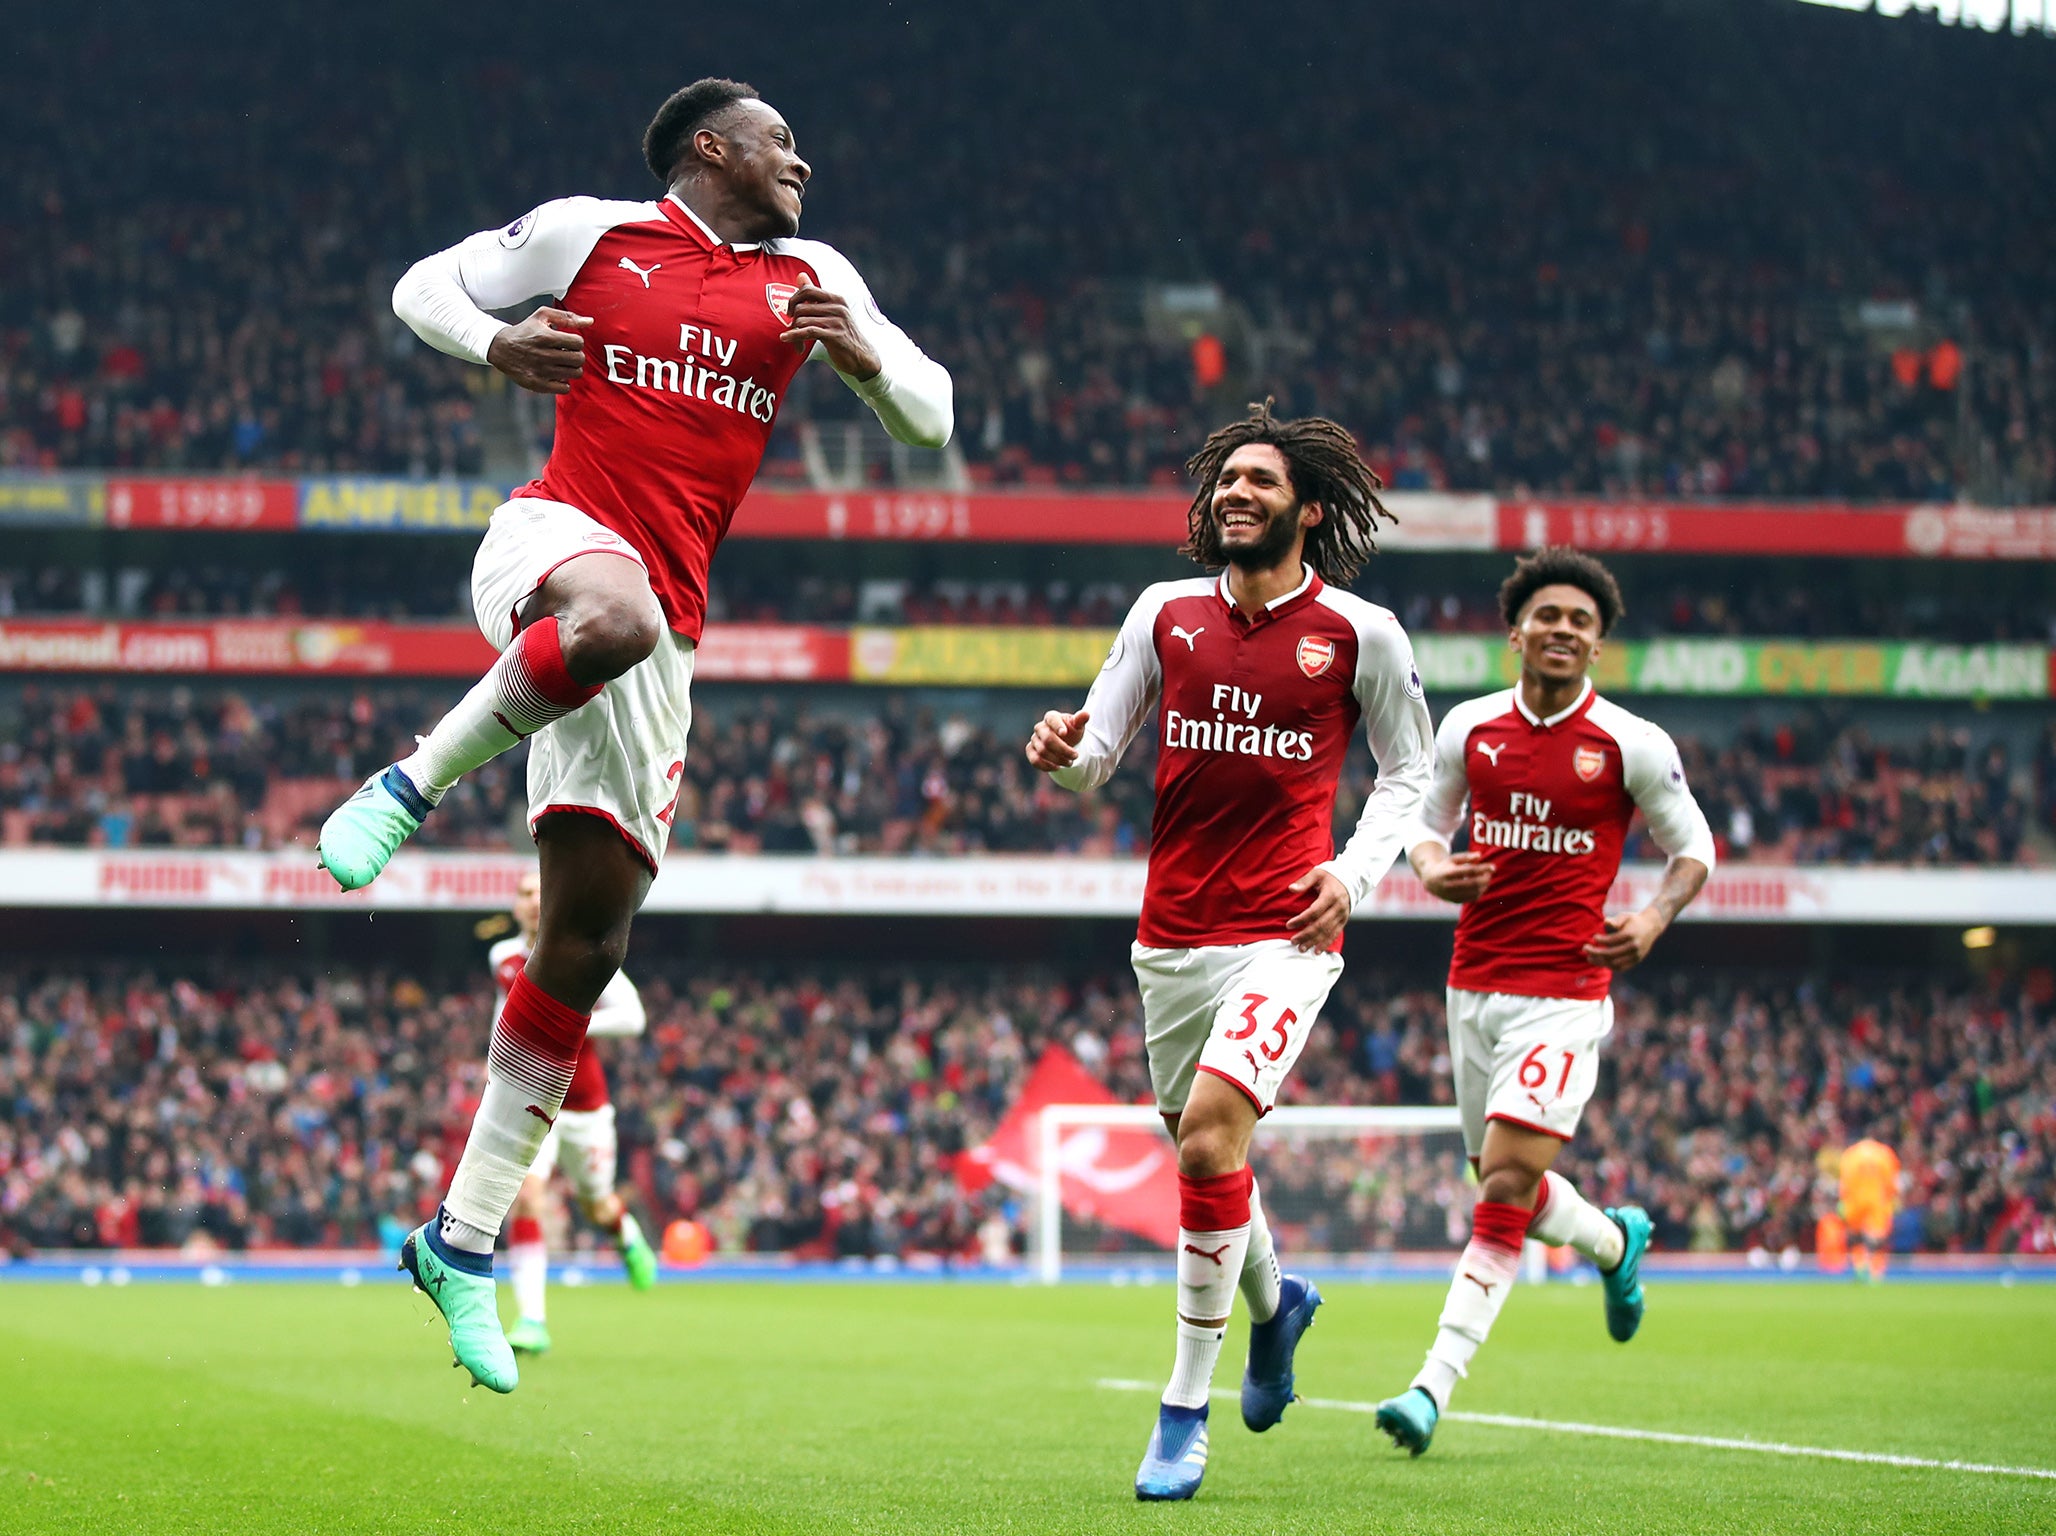 Danny Welbeck scored two